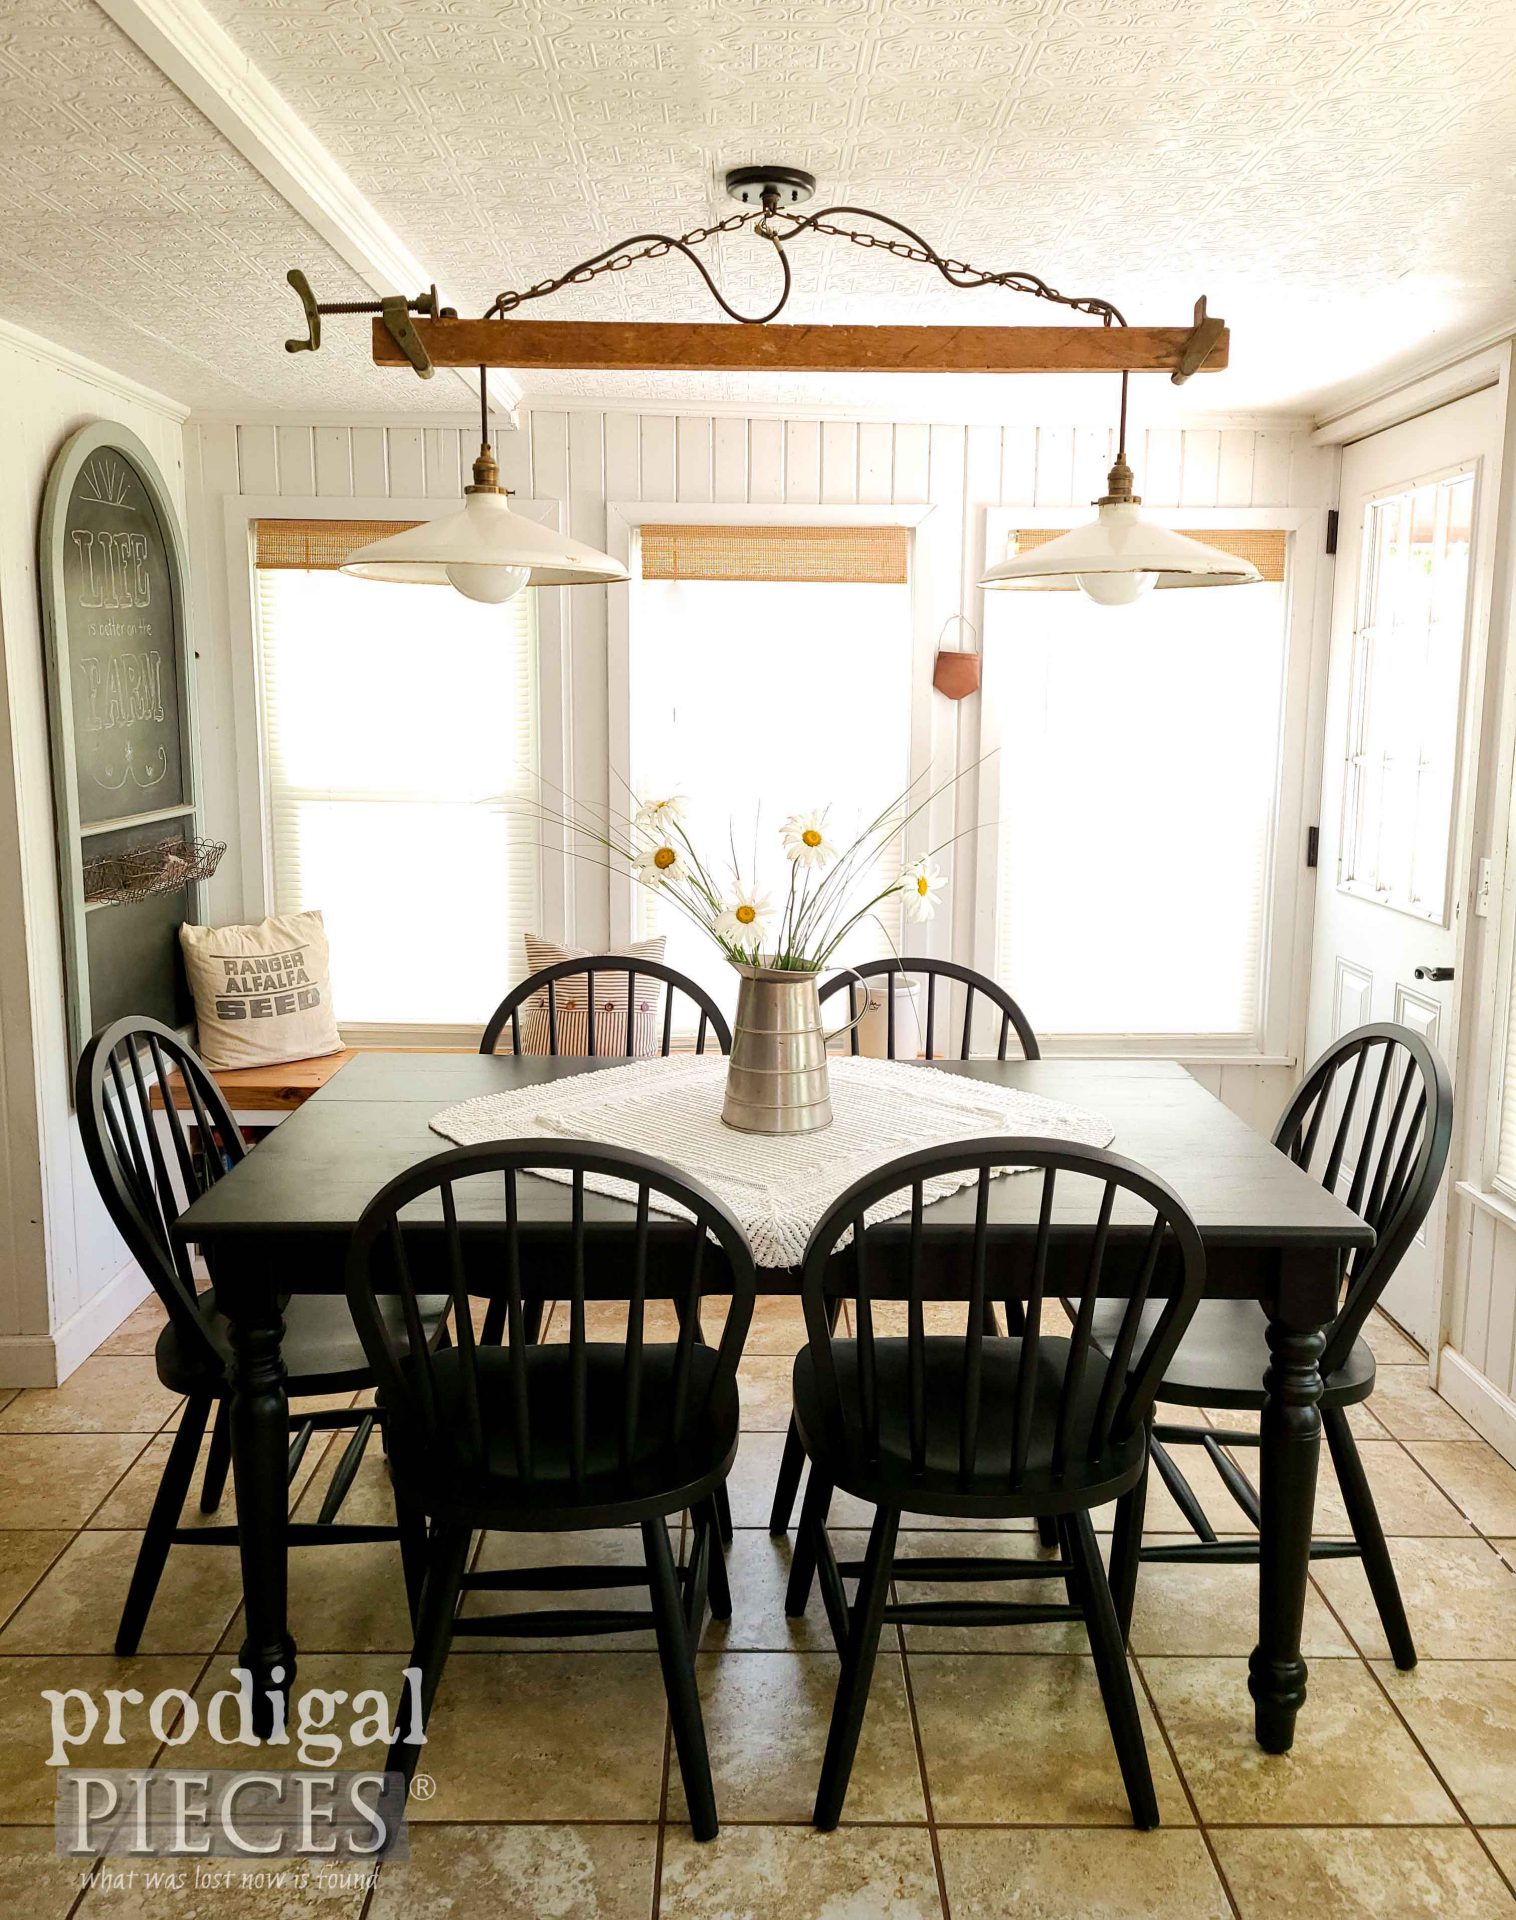 Farmhouse Dining Table Set Refinished by Larissa of Prodigal Pieces | prodigalpieces.com #prodigalpieces #furniture #farmhouse #diy #home #dining #homedecor